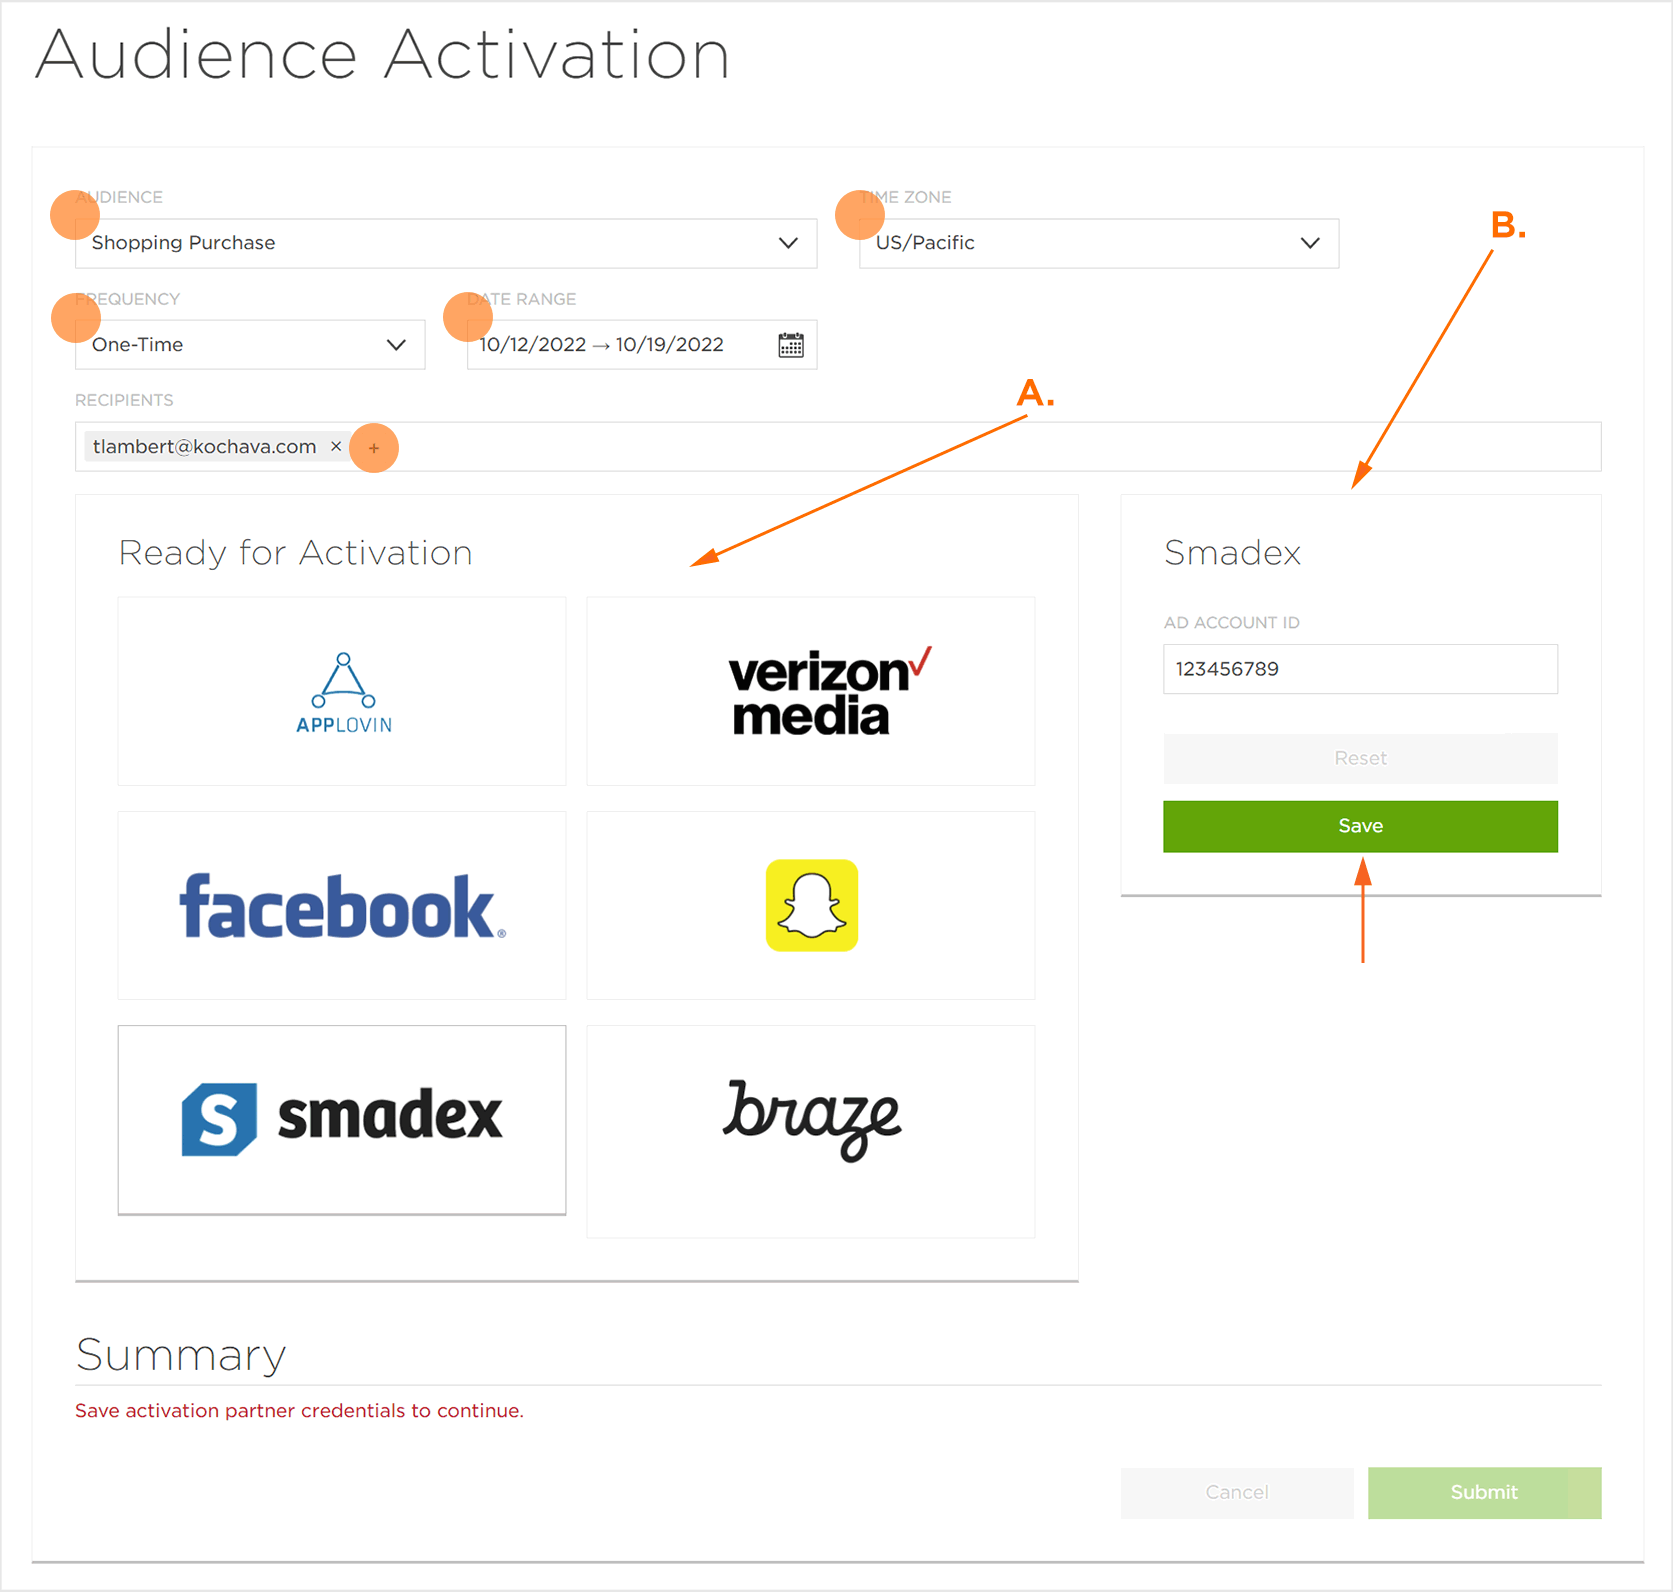 Audience Activation Settings